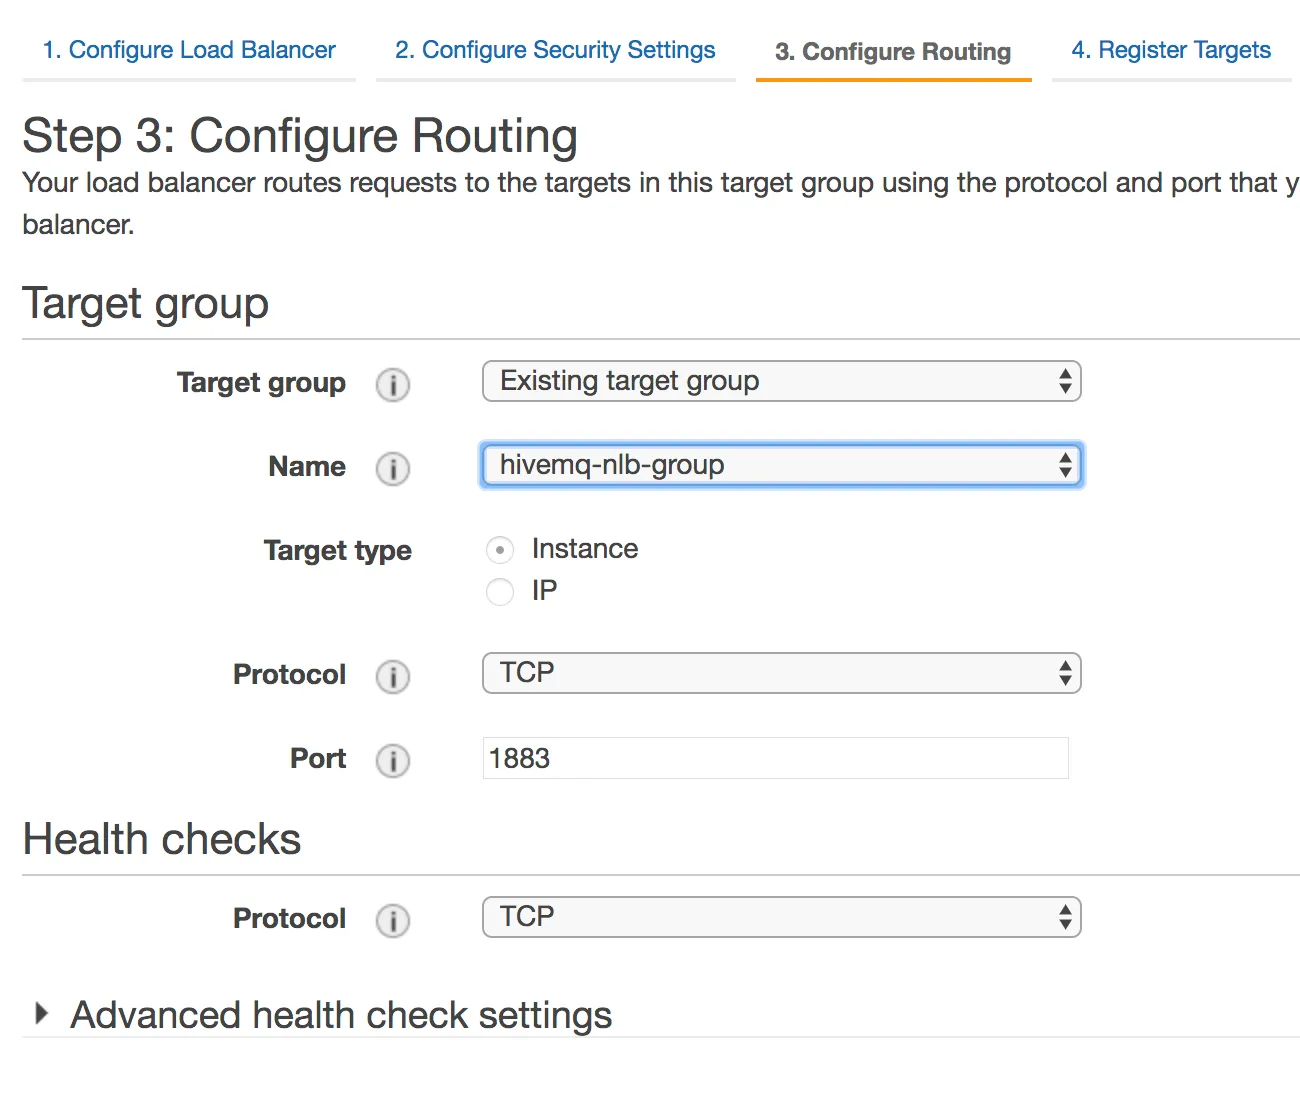 Select our newly created target group and go to “Register Targets”